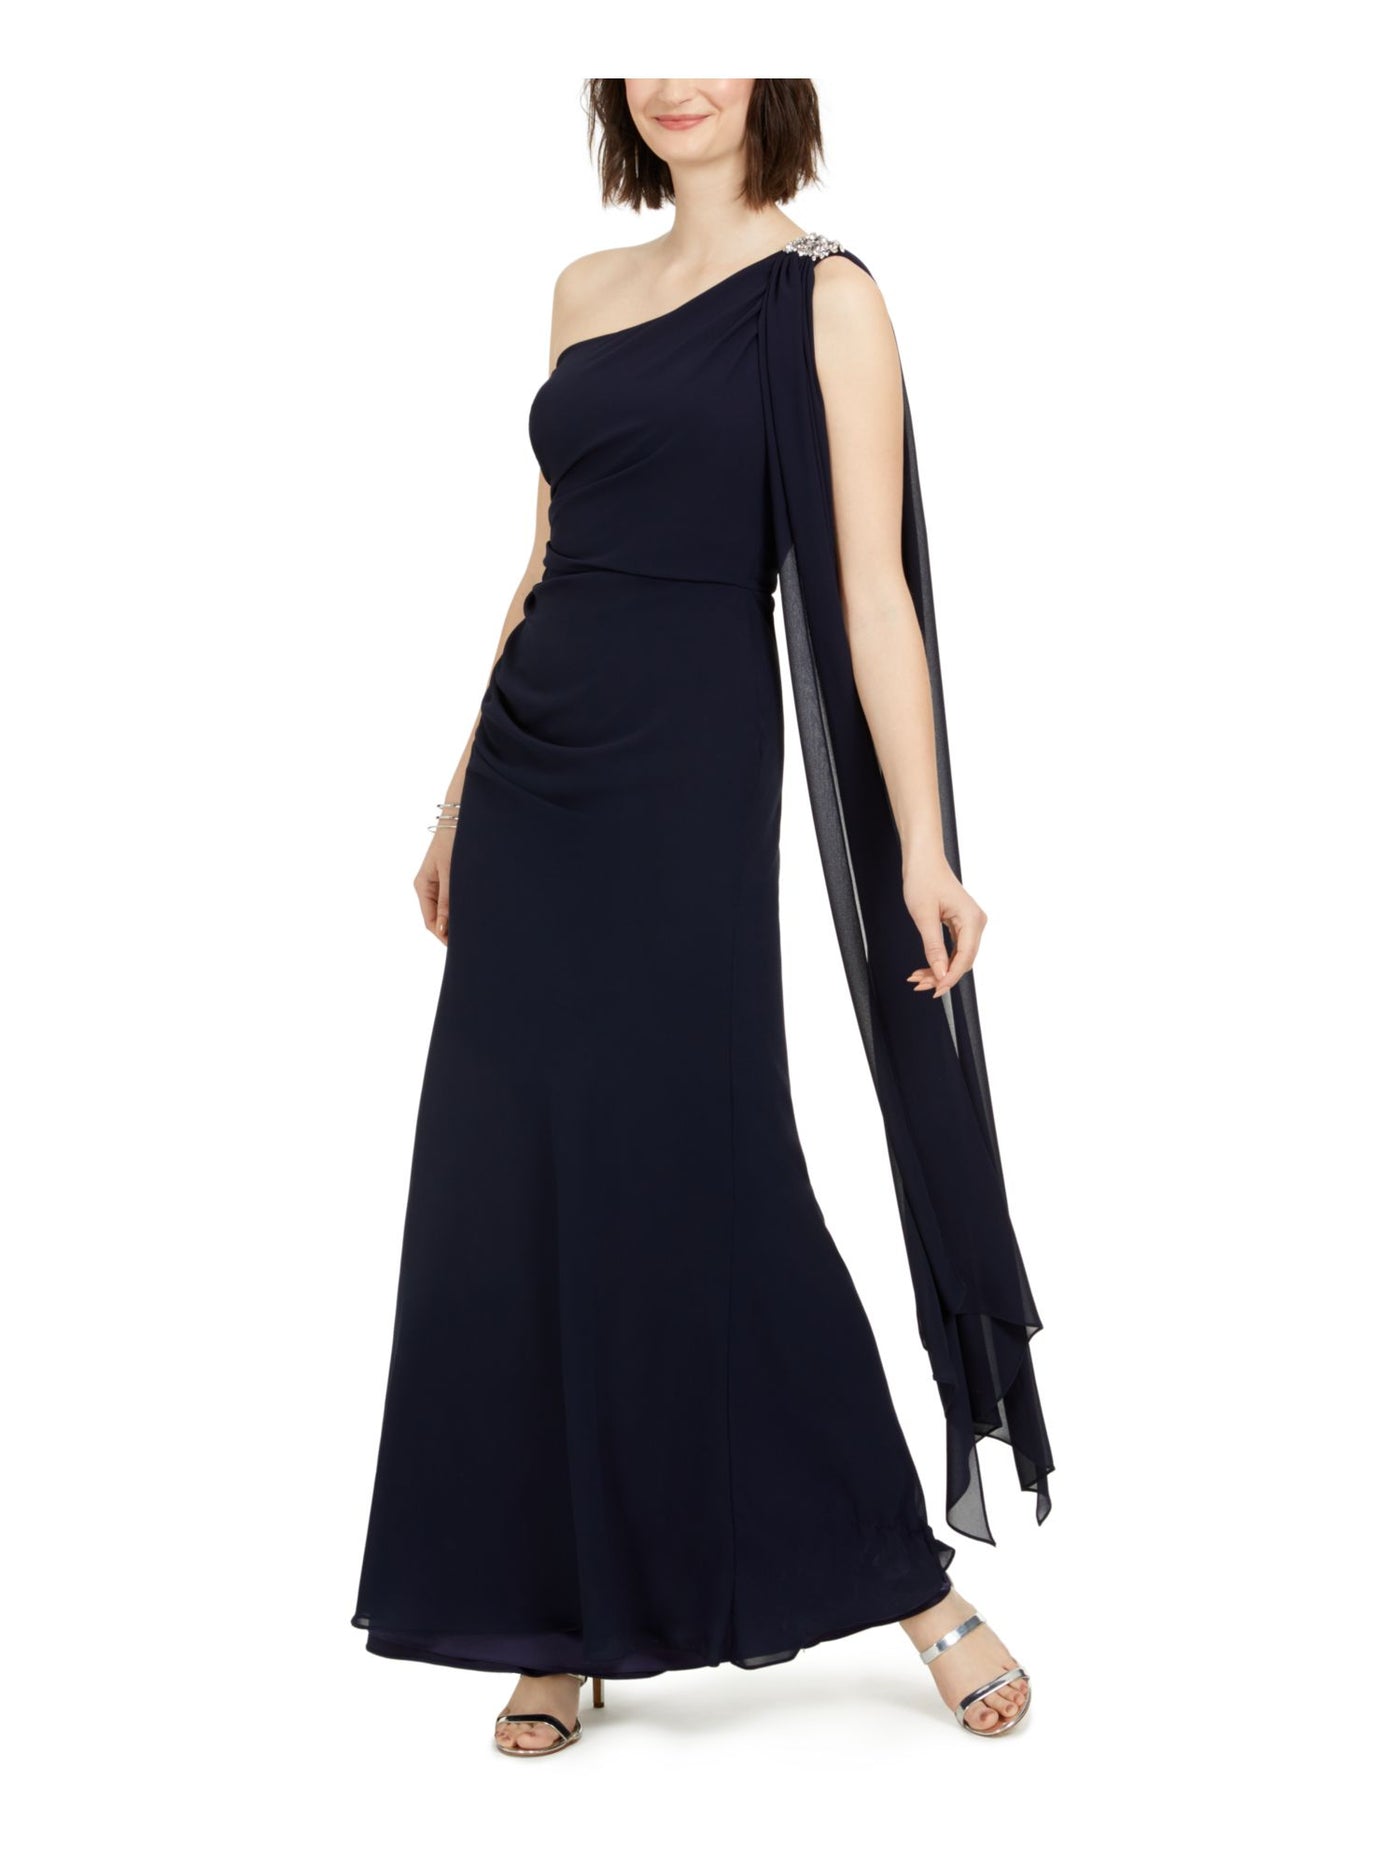 VINCE CAMUTO Womens Navy Stretch Embellished Zippered One-shoulder Chiffon Gown Sleeveless Asymmetrical Neckline Maxi Formal Dress Petites 10P